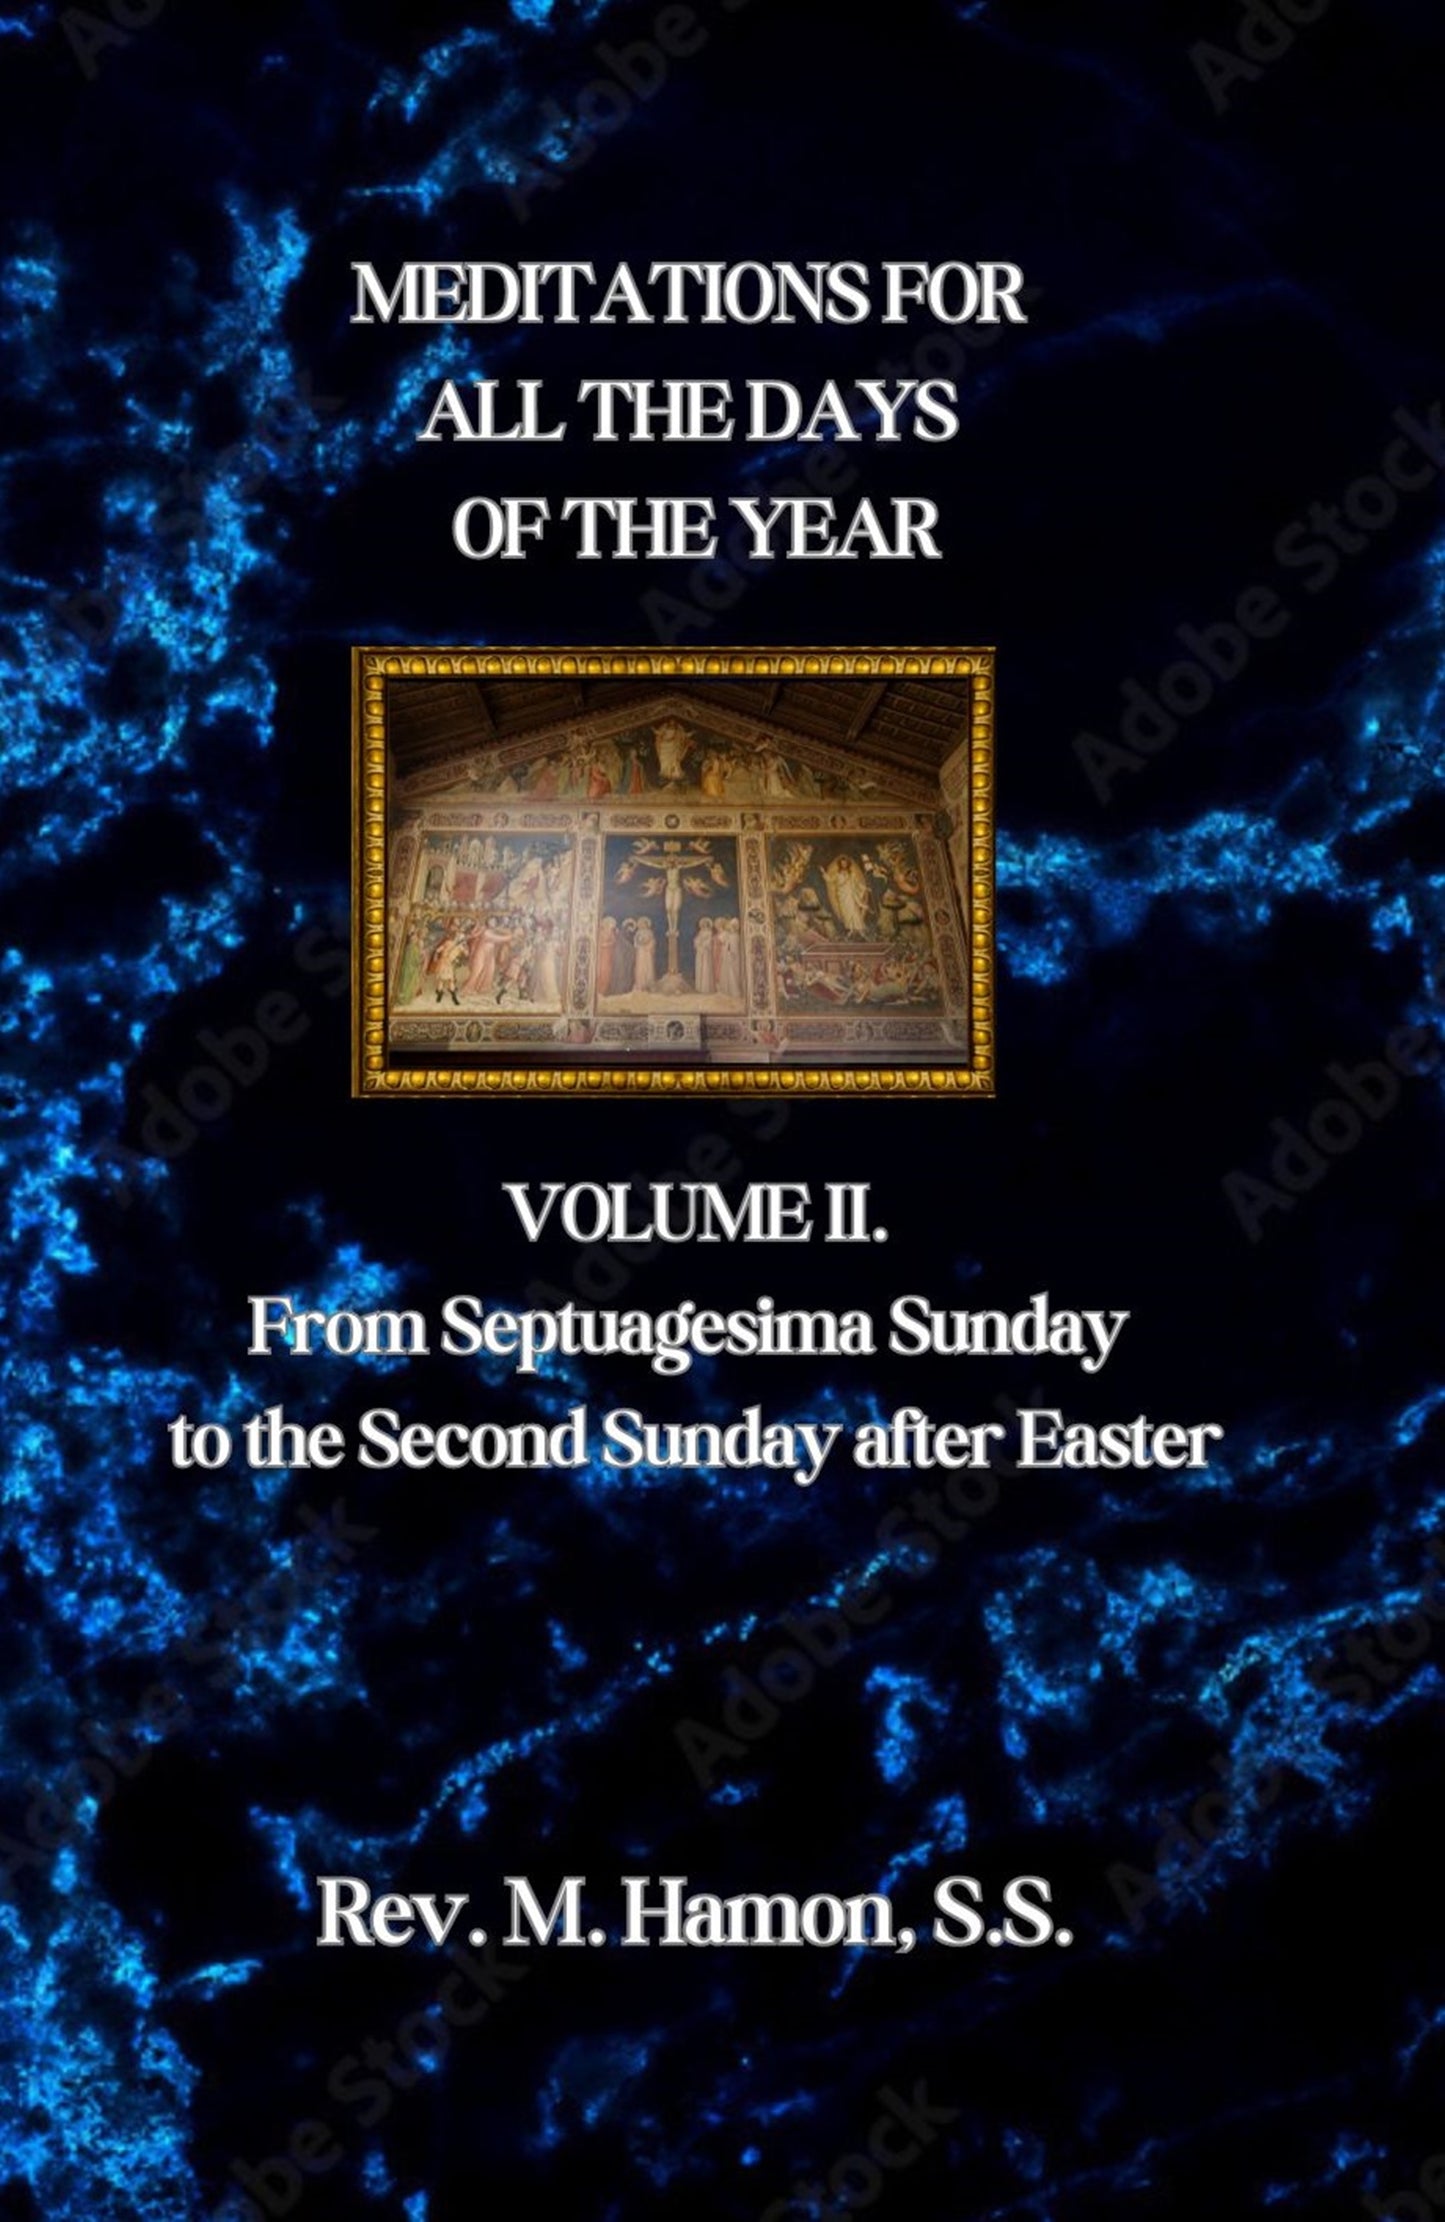 Meditations For All the Days of the Year: Volume II. From Septuagesima Sunday to the Second Sunday after Easter